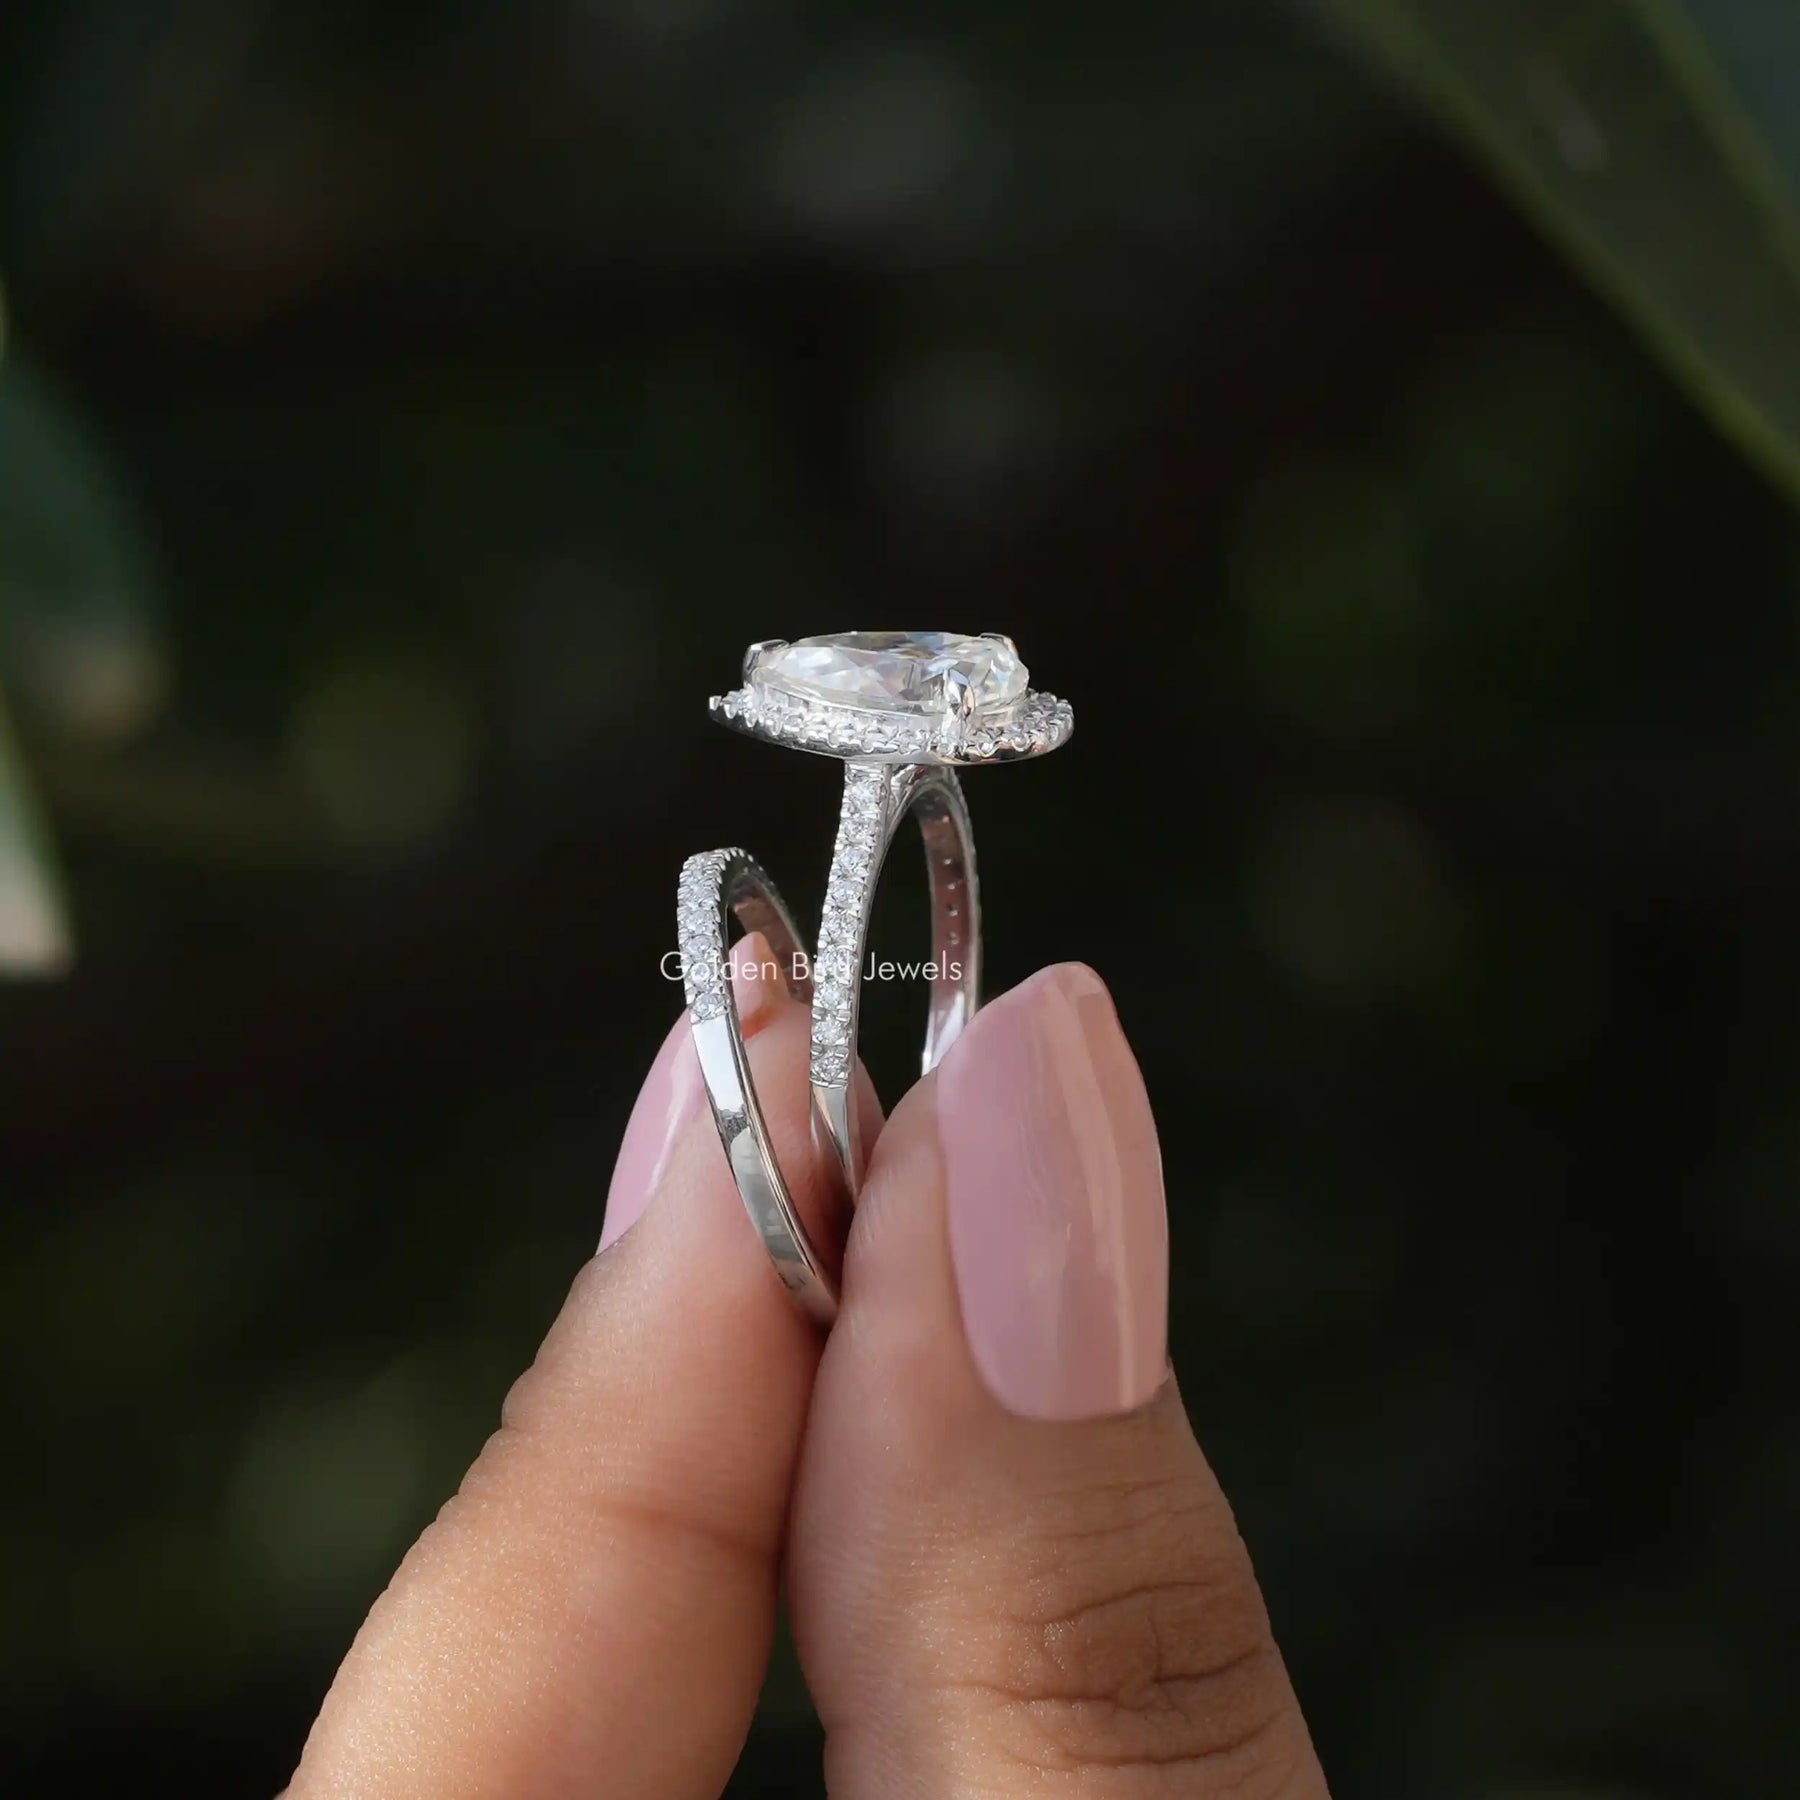 [Side view of pear halo moissanite halo wedding ring set]-[Golden Bird Jewels]